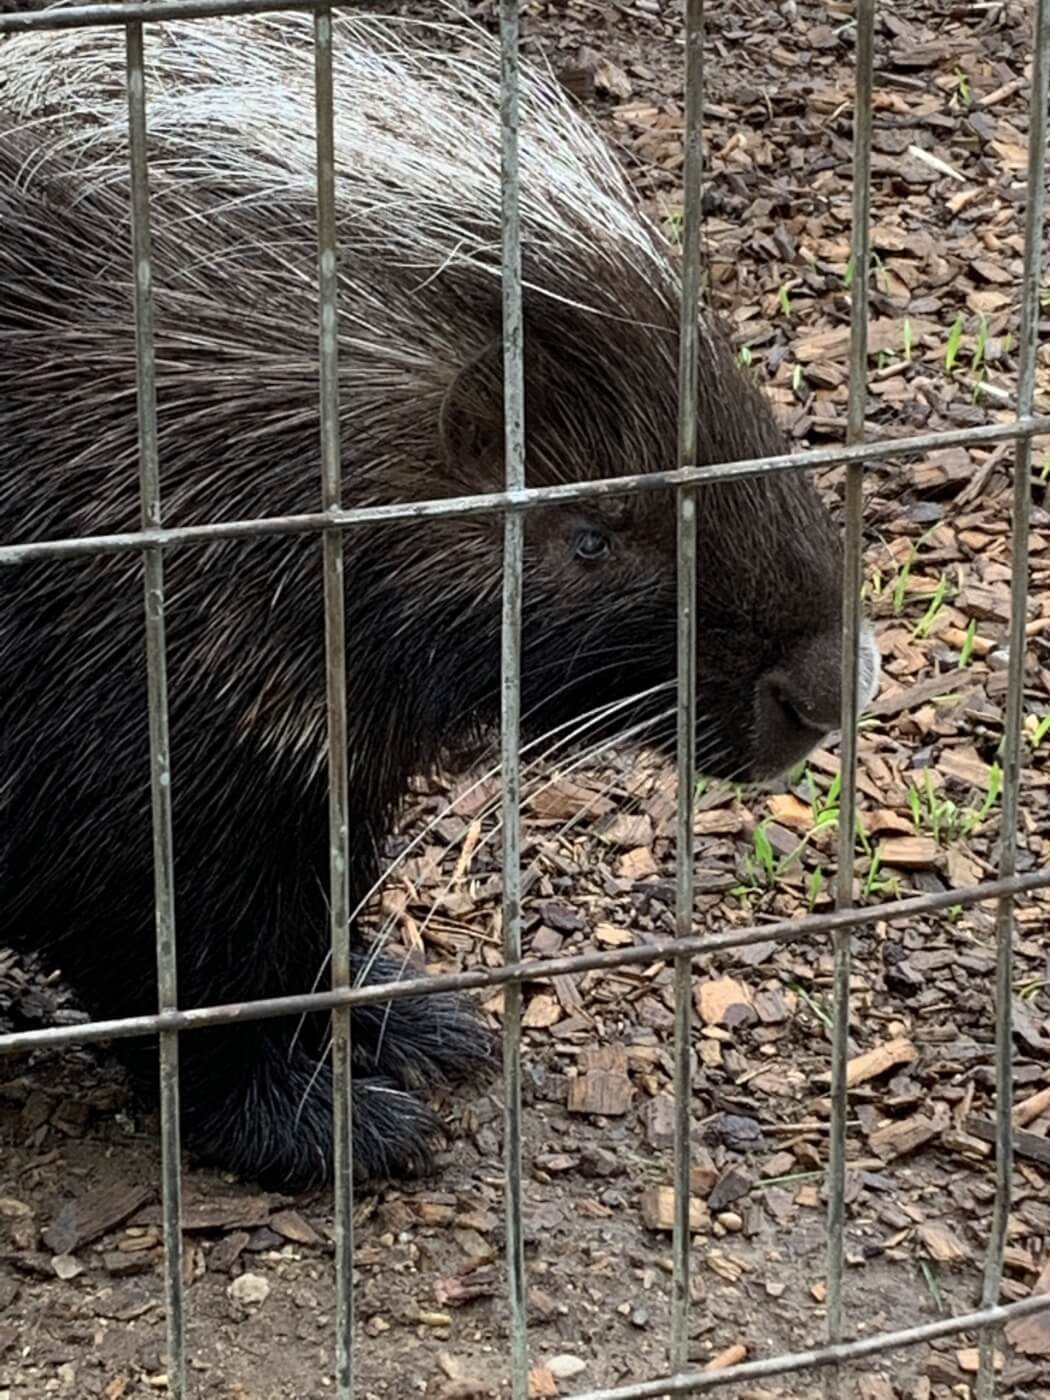 sick porcupine at animal haven zoo